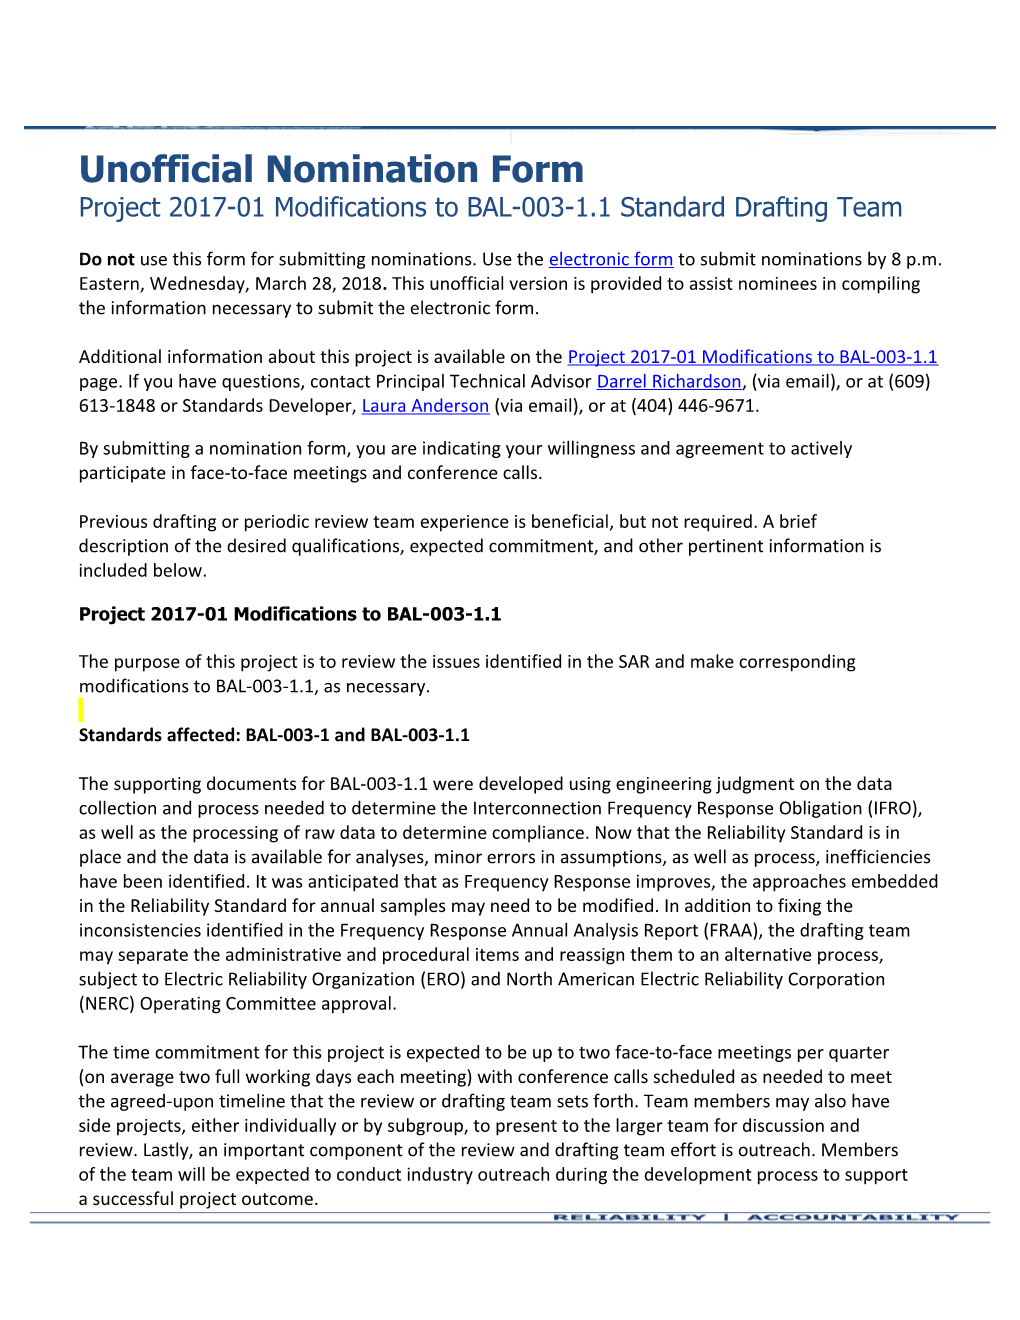 Unofficial Nomination Form Project 2017-01 Modifications to BAL-003-1.1 Standard Drafting Team